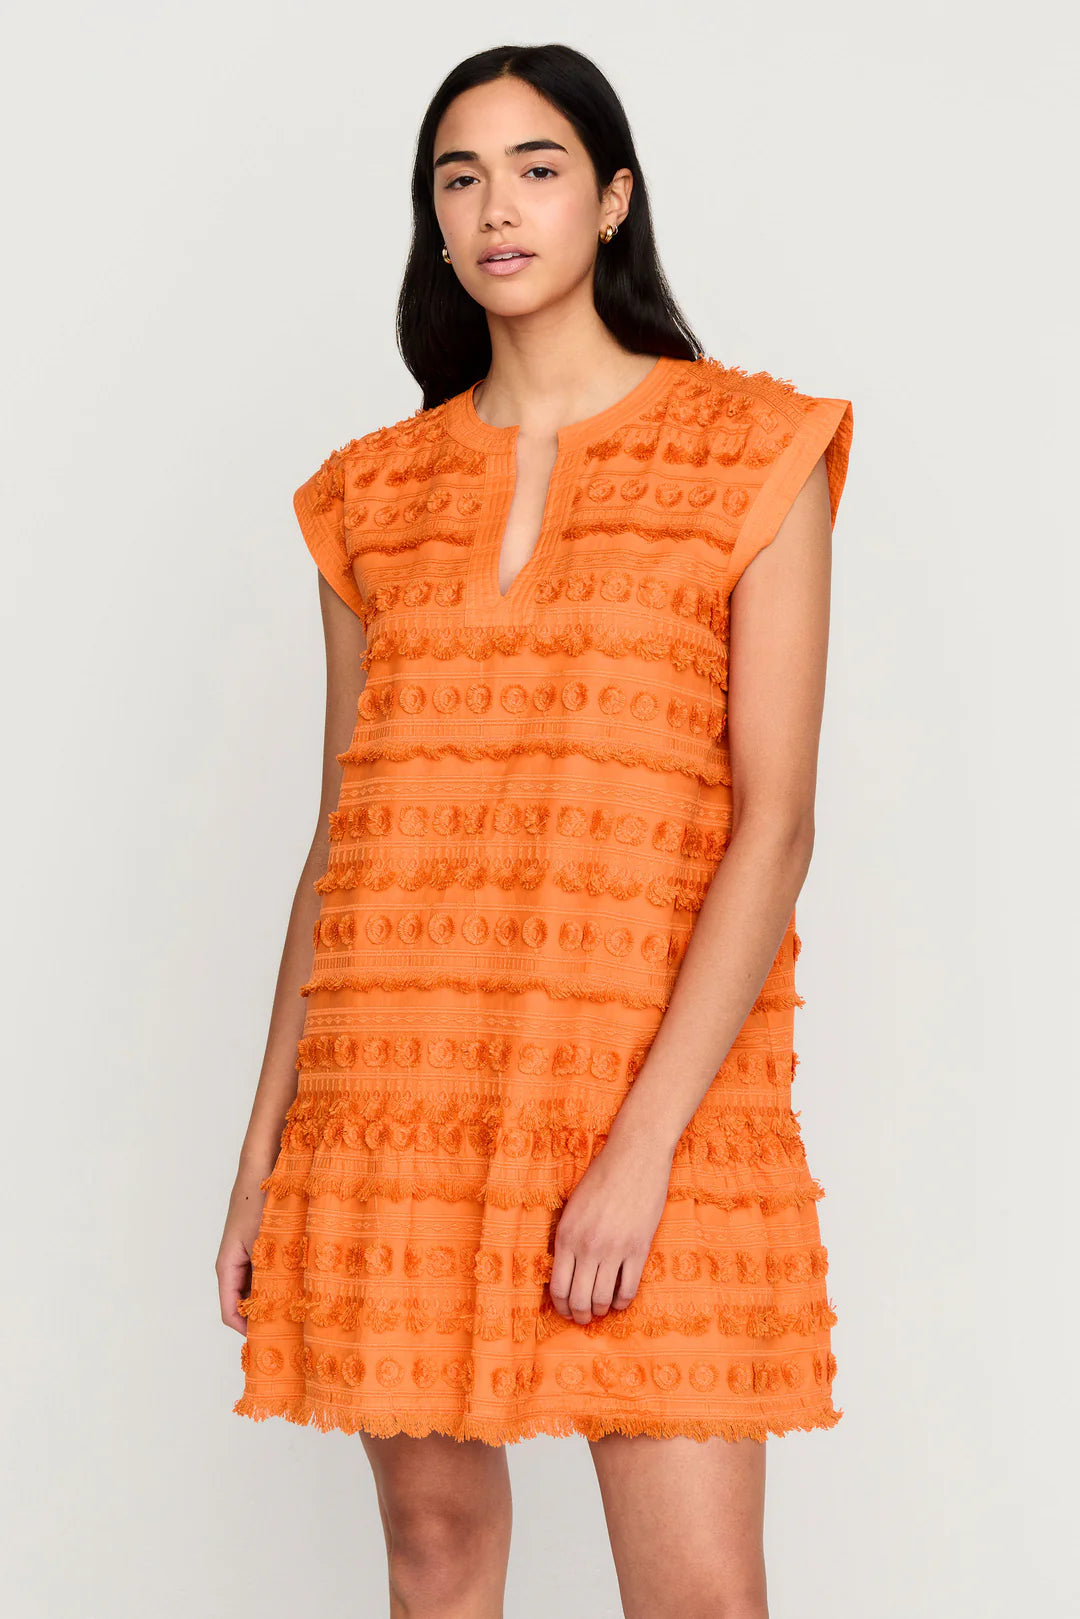 Herra Dress by Marie Oliver in Persimmon